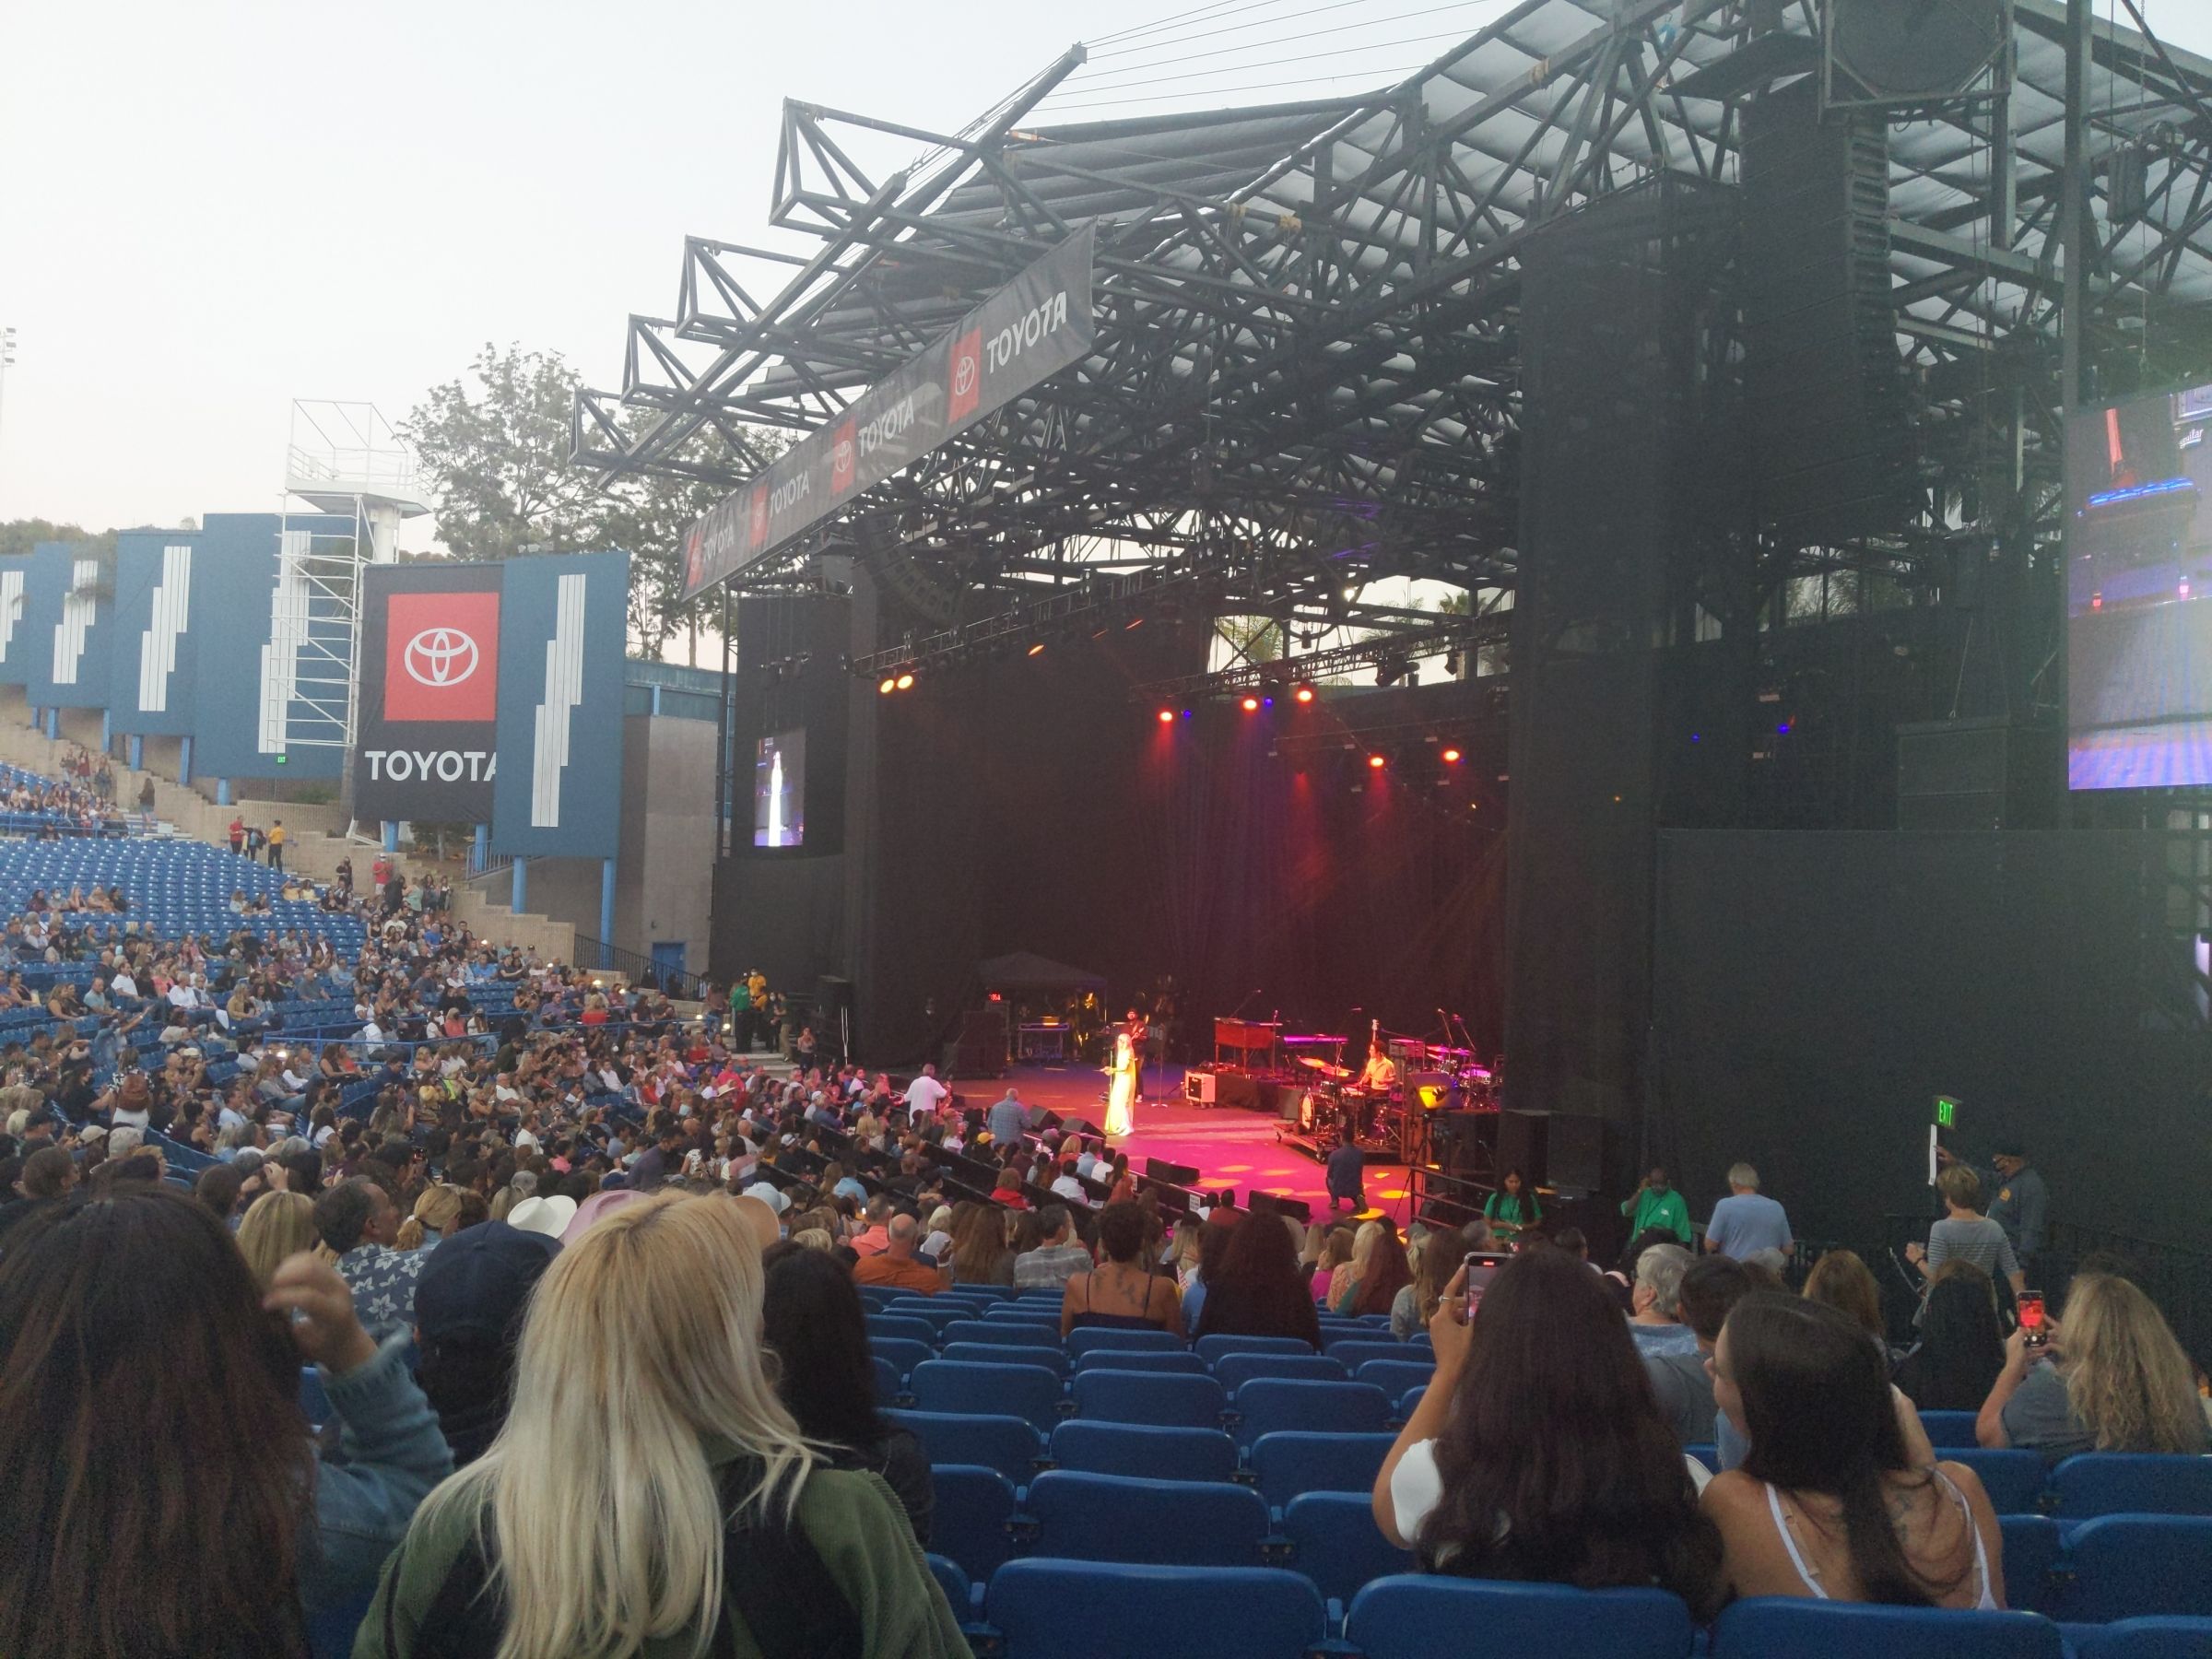 Section 1 at Pacific Amphitheatre